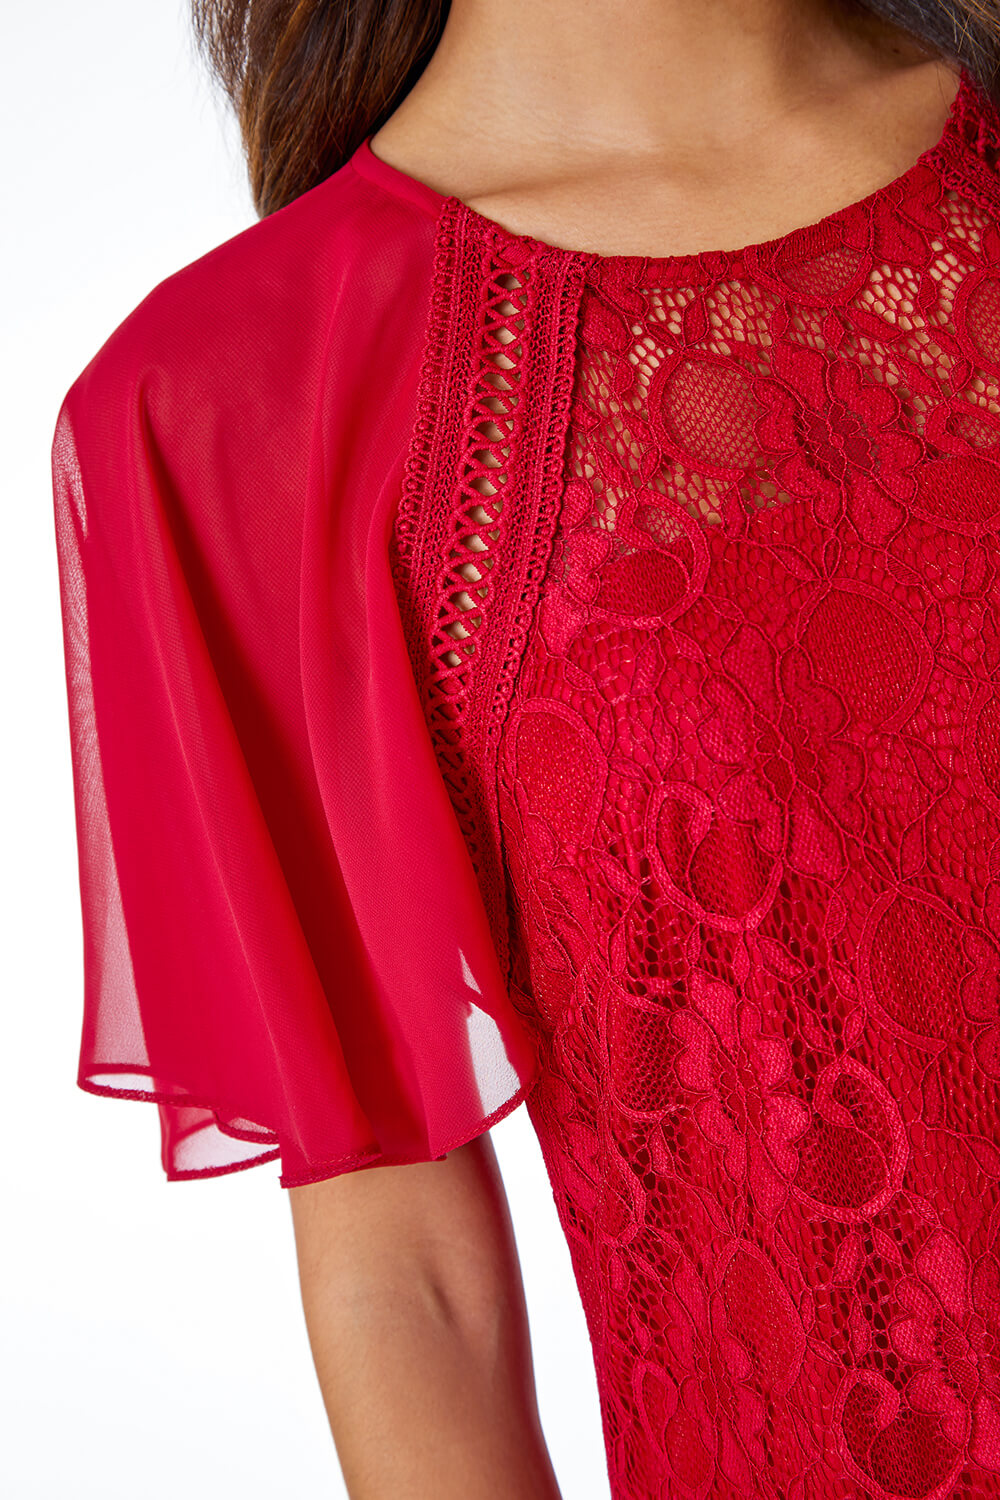 Red Lace Chiffon Sleeve Shell Top, Image 5 of 5